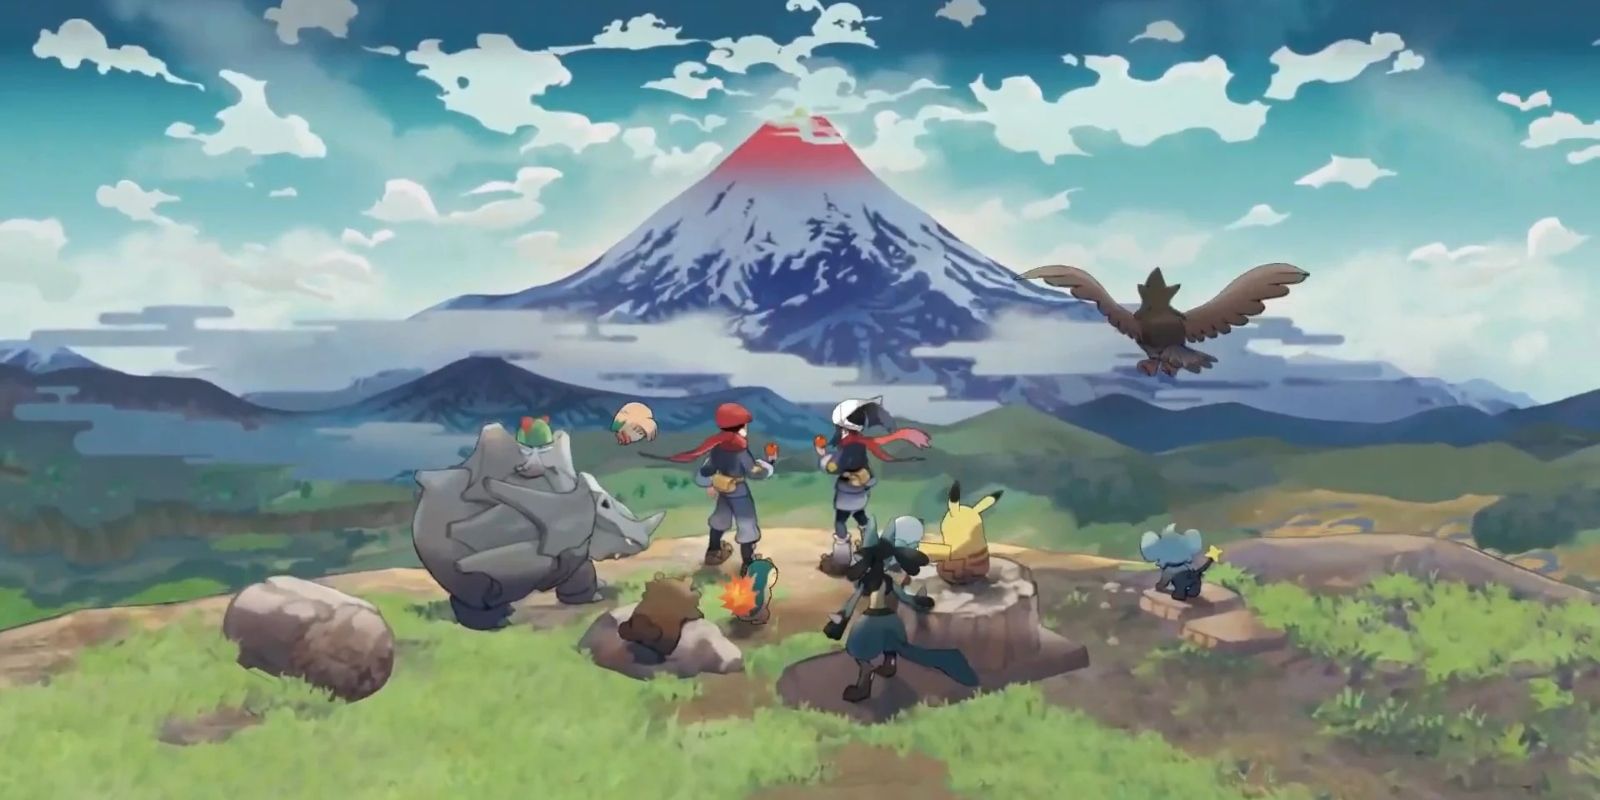 Key art for Pokémon Legends: Arceus depicting the protagonists and their Pokémon looking at Mt. Coronet.